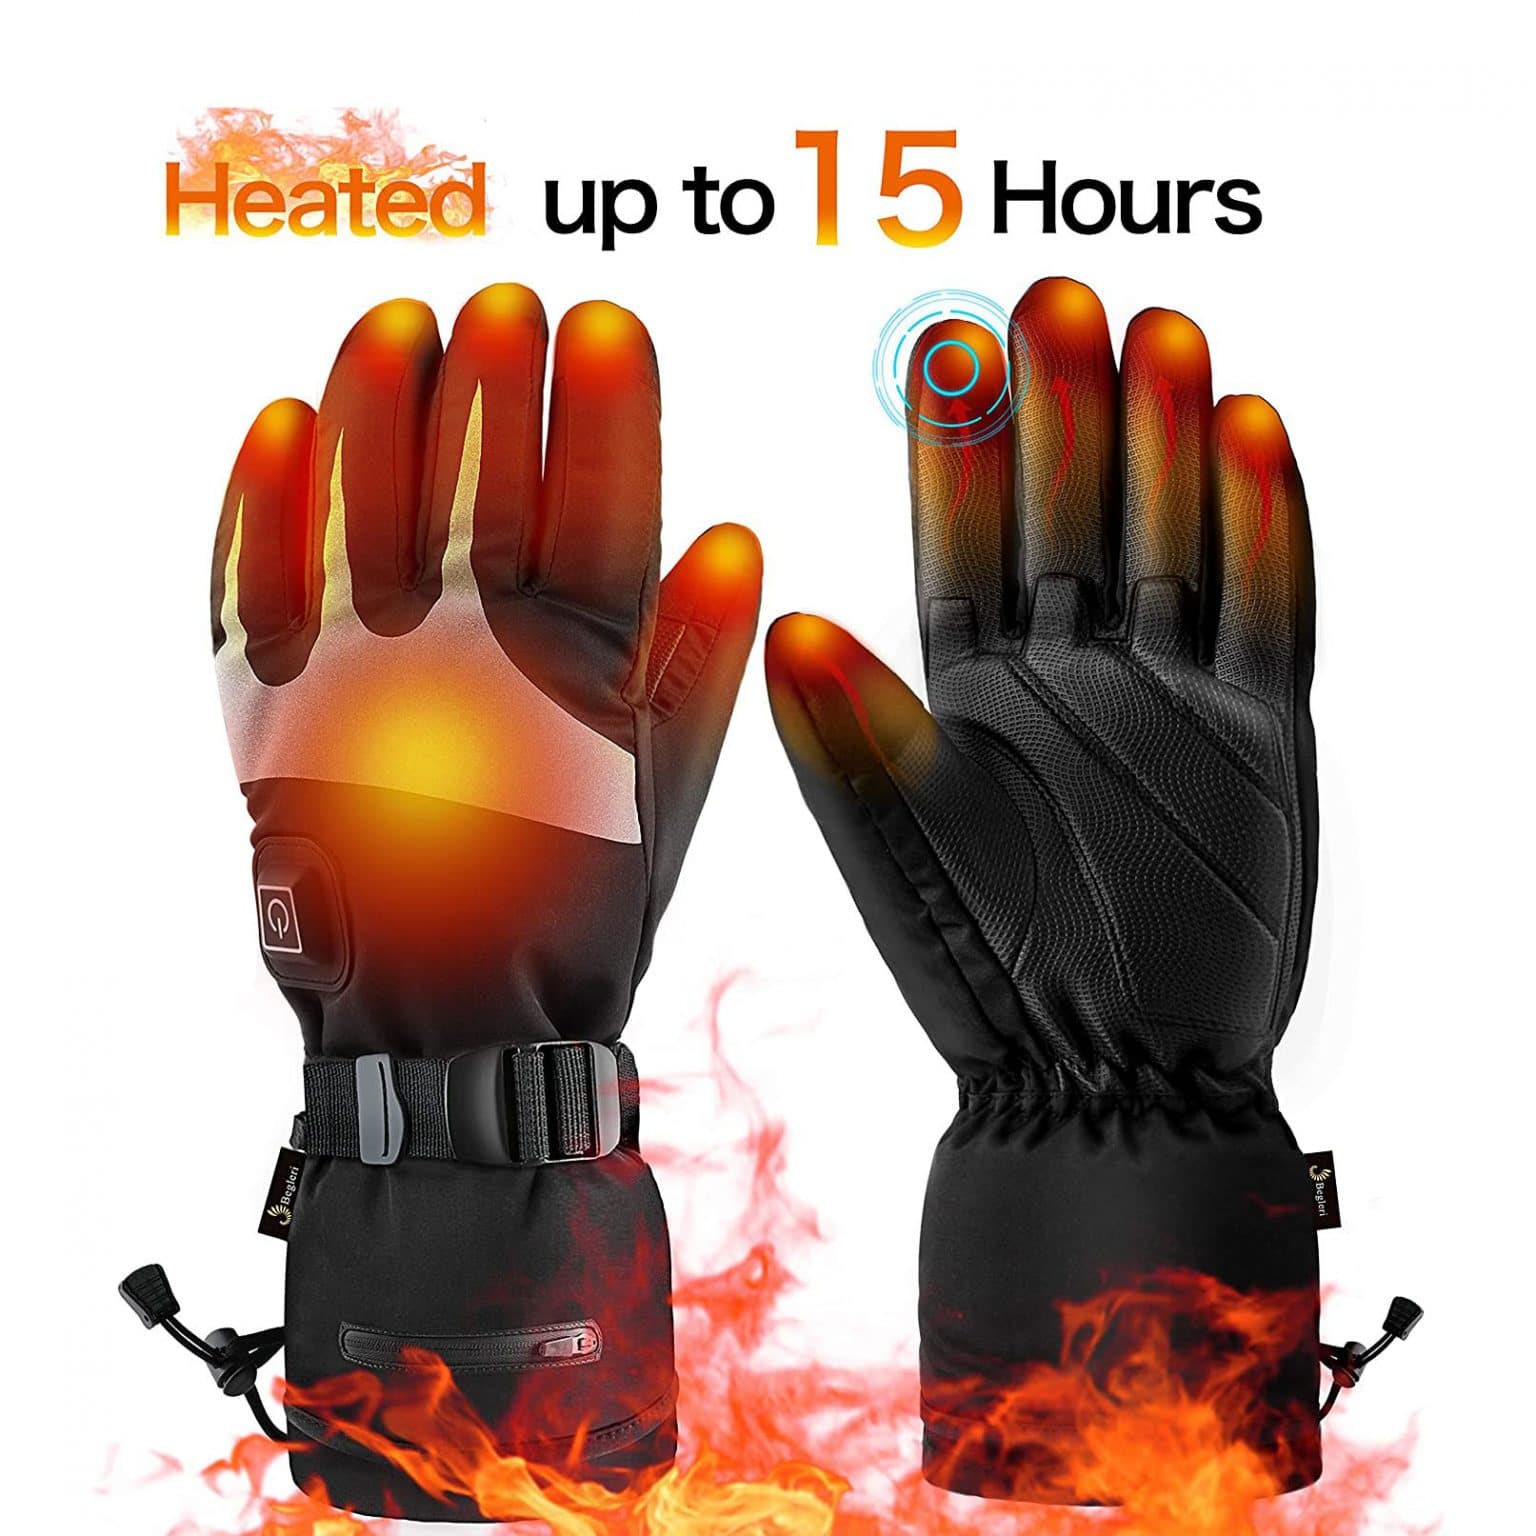 Top 10 Best Heated Gloves in 2022 Reviews | Guide